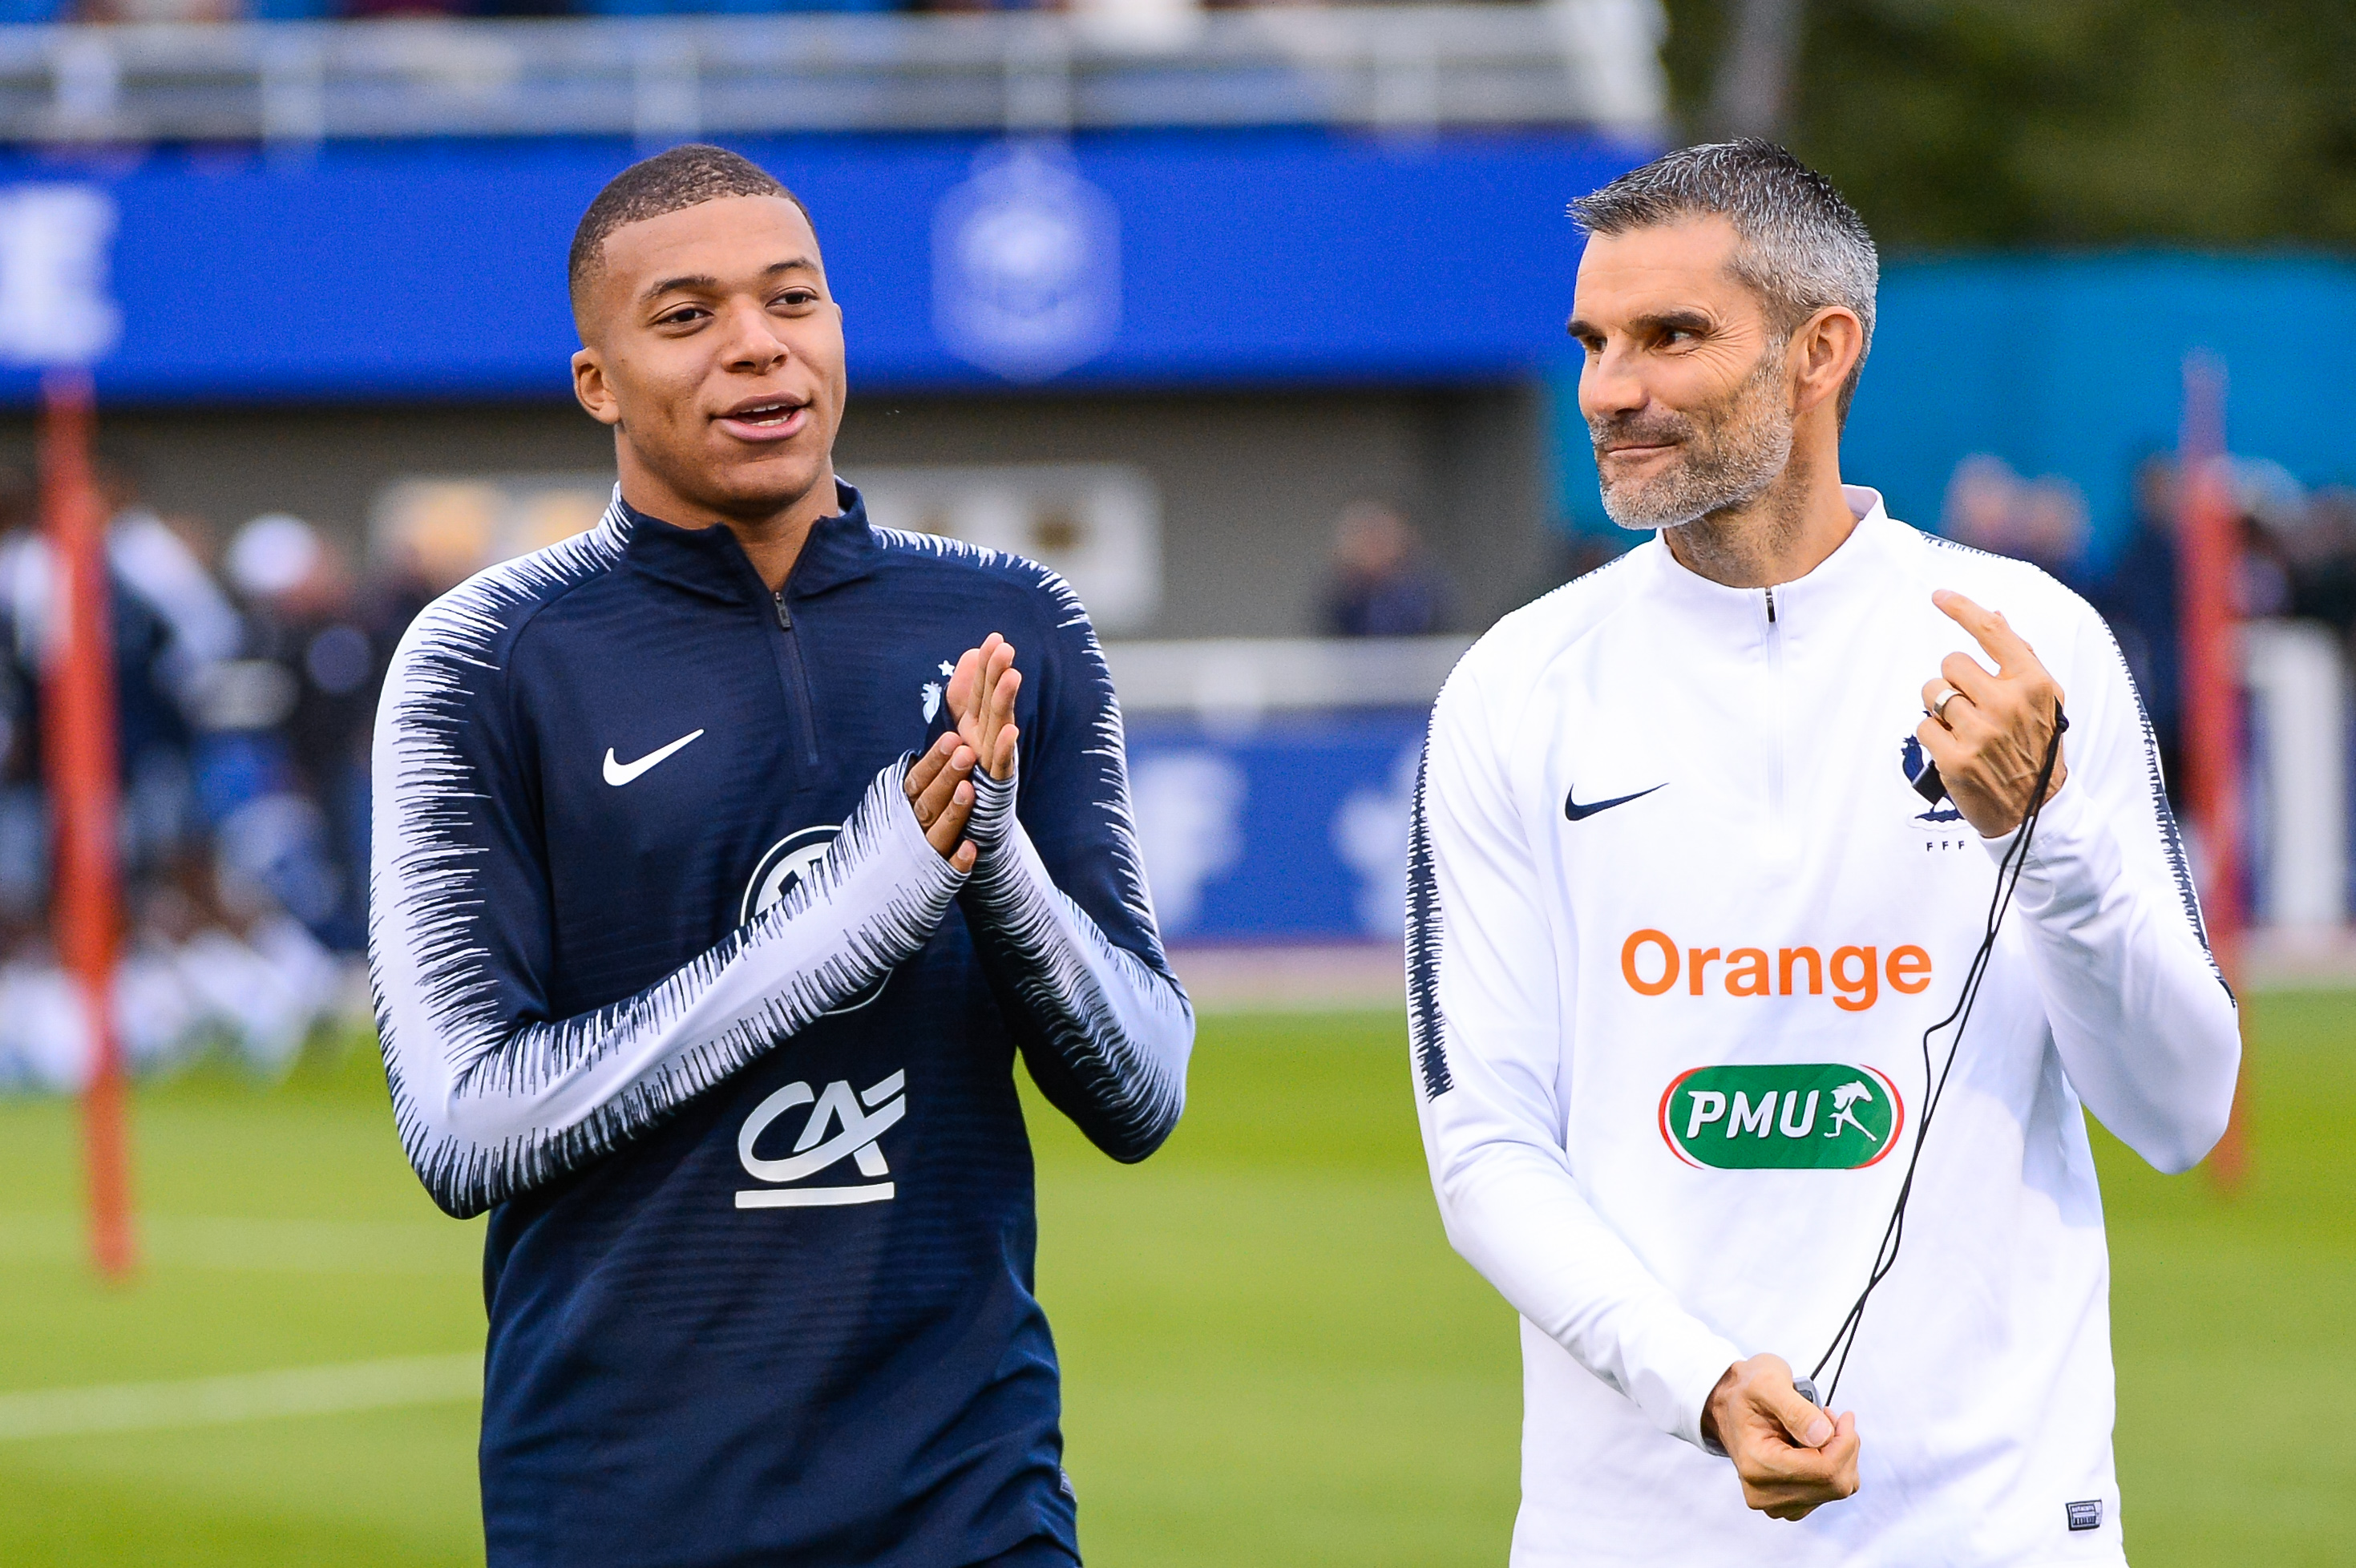 Paris Saint-Germain ace Kylian Mbappe withdraws from France duty due to injury